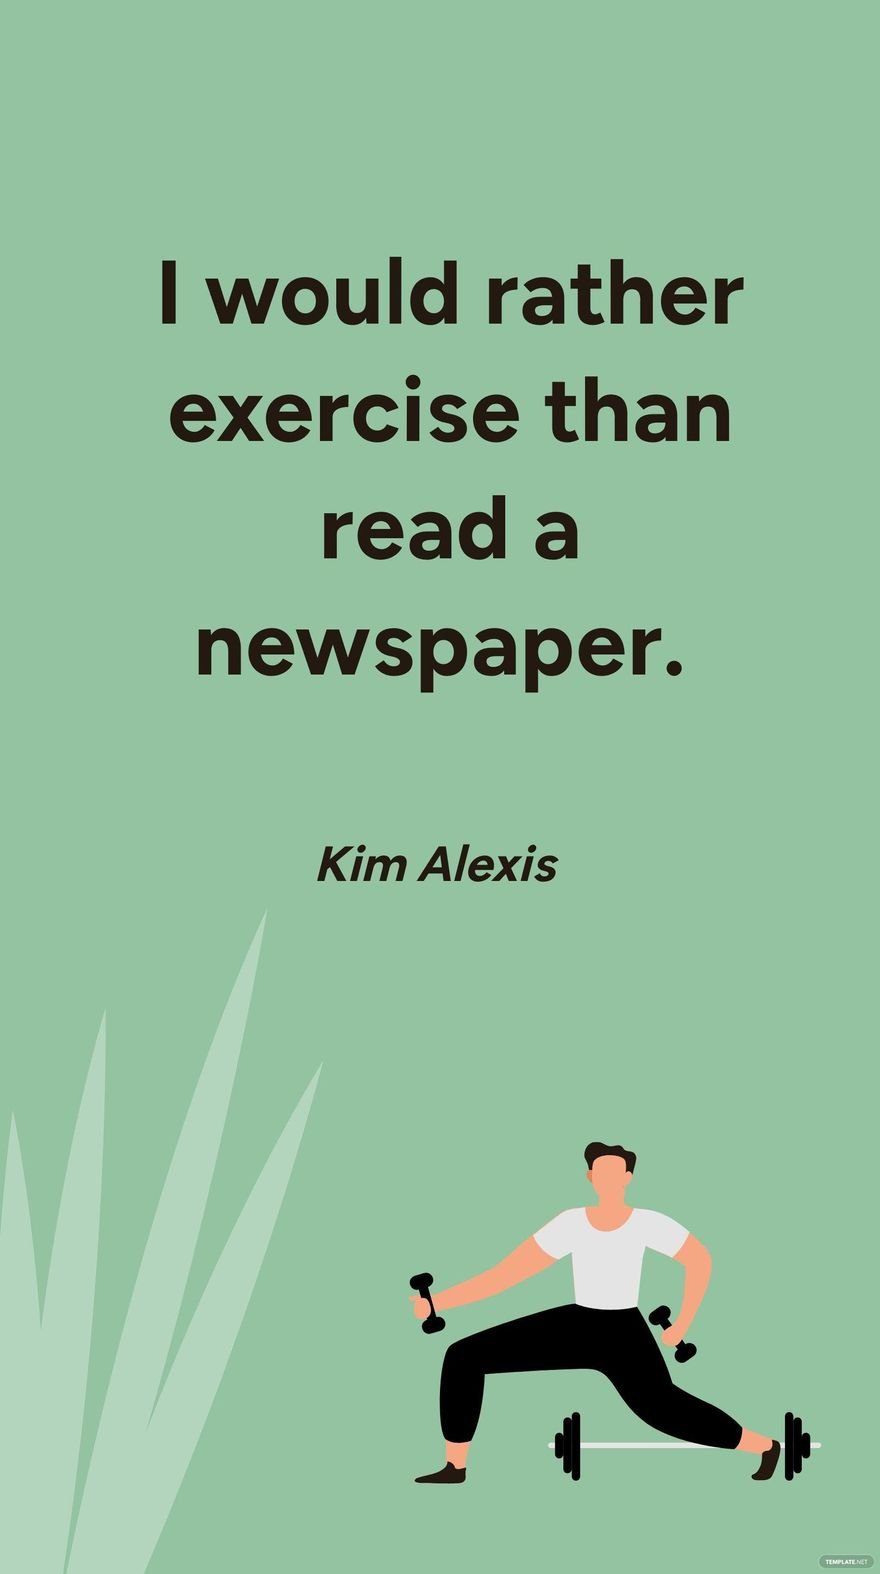 Free Kim Alexis - I would rather exercise than read a newspaper. in JPG